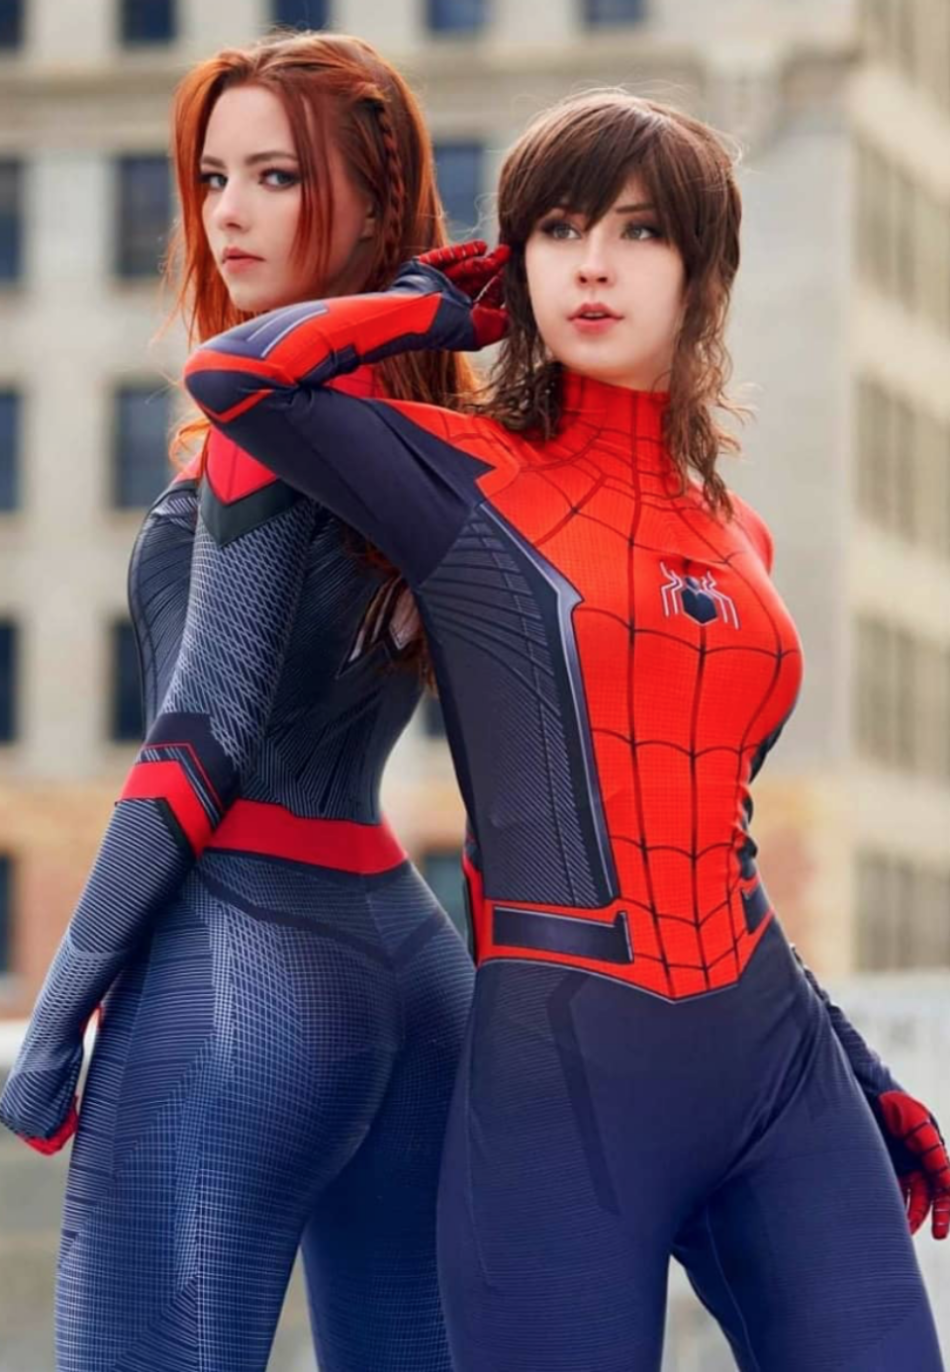 Sexy Red Hot Cosplay Girls Spiderman Women Best Photo Compilation 2021 (89 HQ Photos) 227